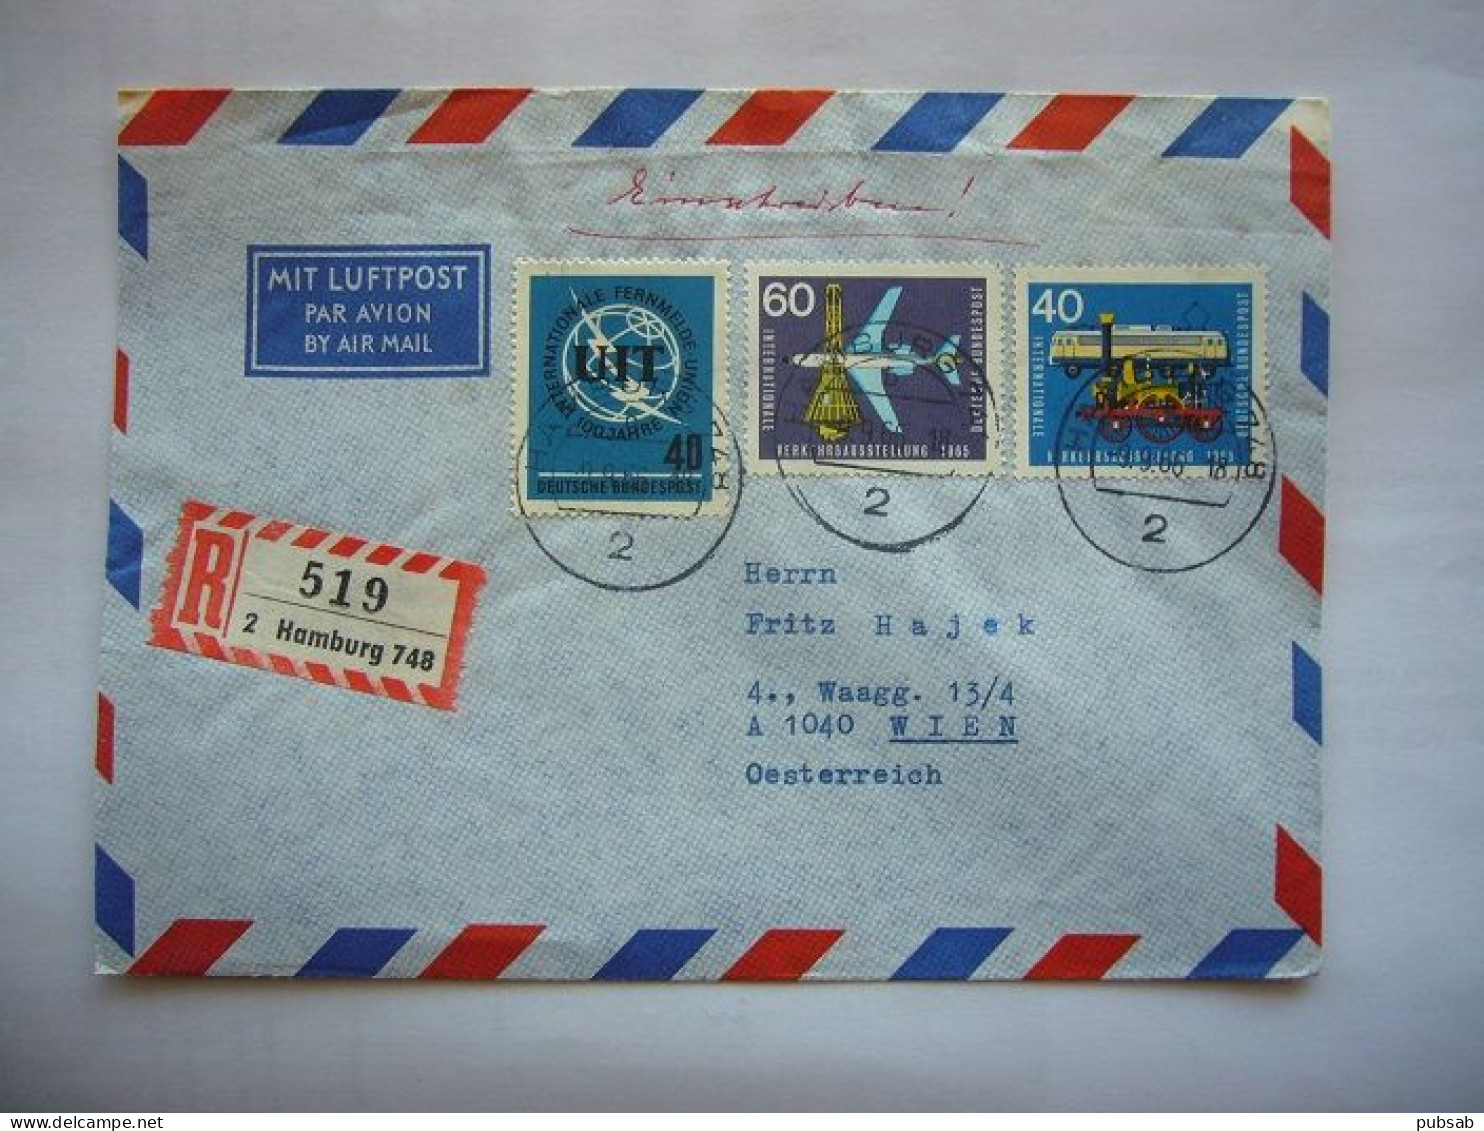 Avion / Airplane / Registered Mail From Hamburg To Wien / Sep 09,66 At 18h - Covers & Documents